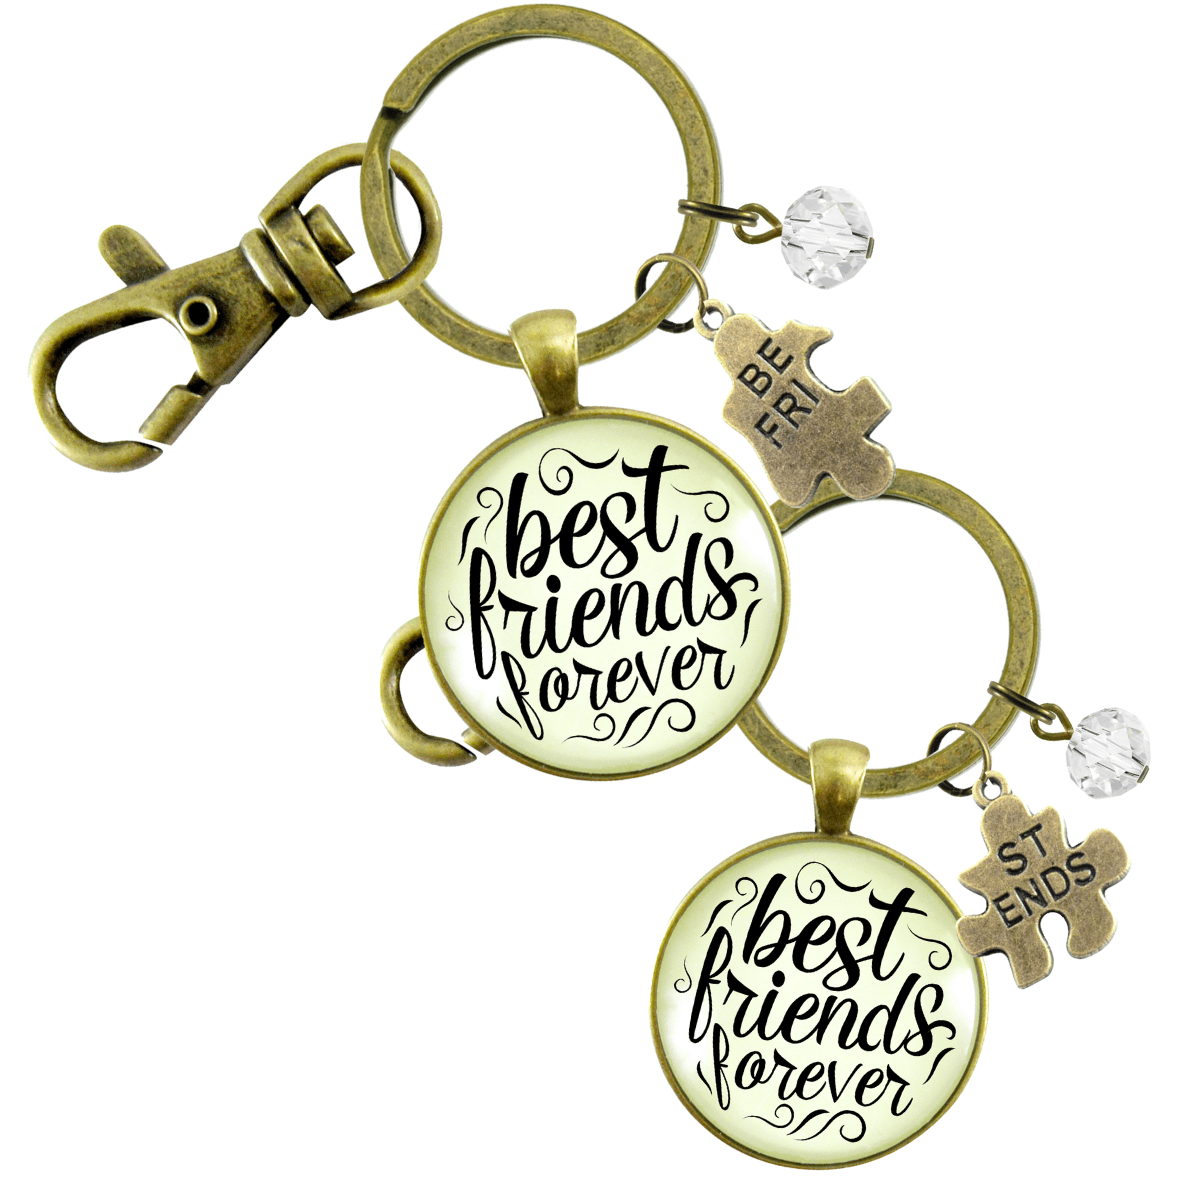 Best Friends Forever Keychains Set of 2 Bff Quote Jewelry Charm - Gutsy Goodness